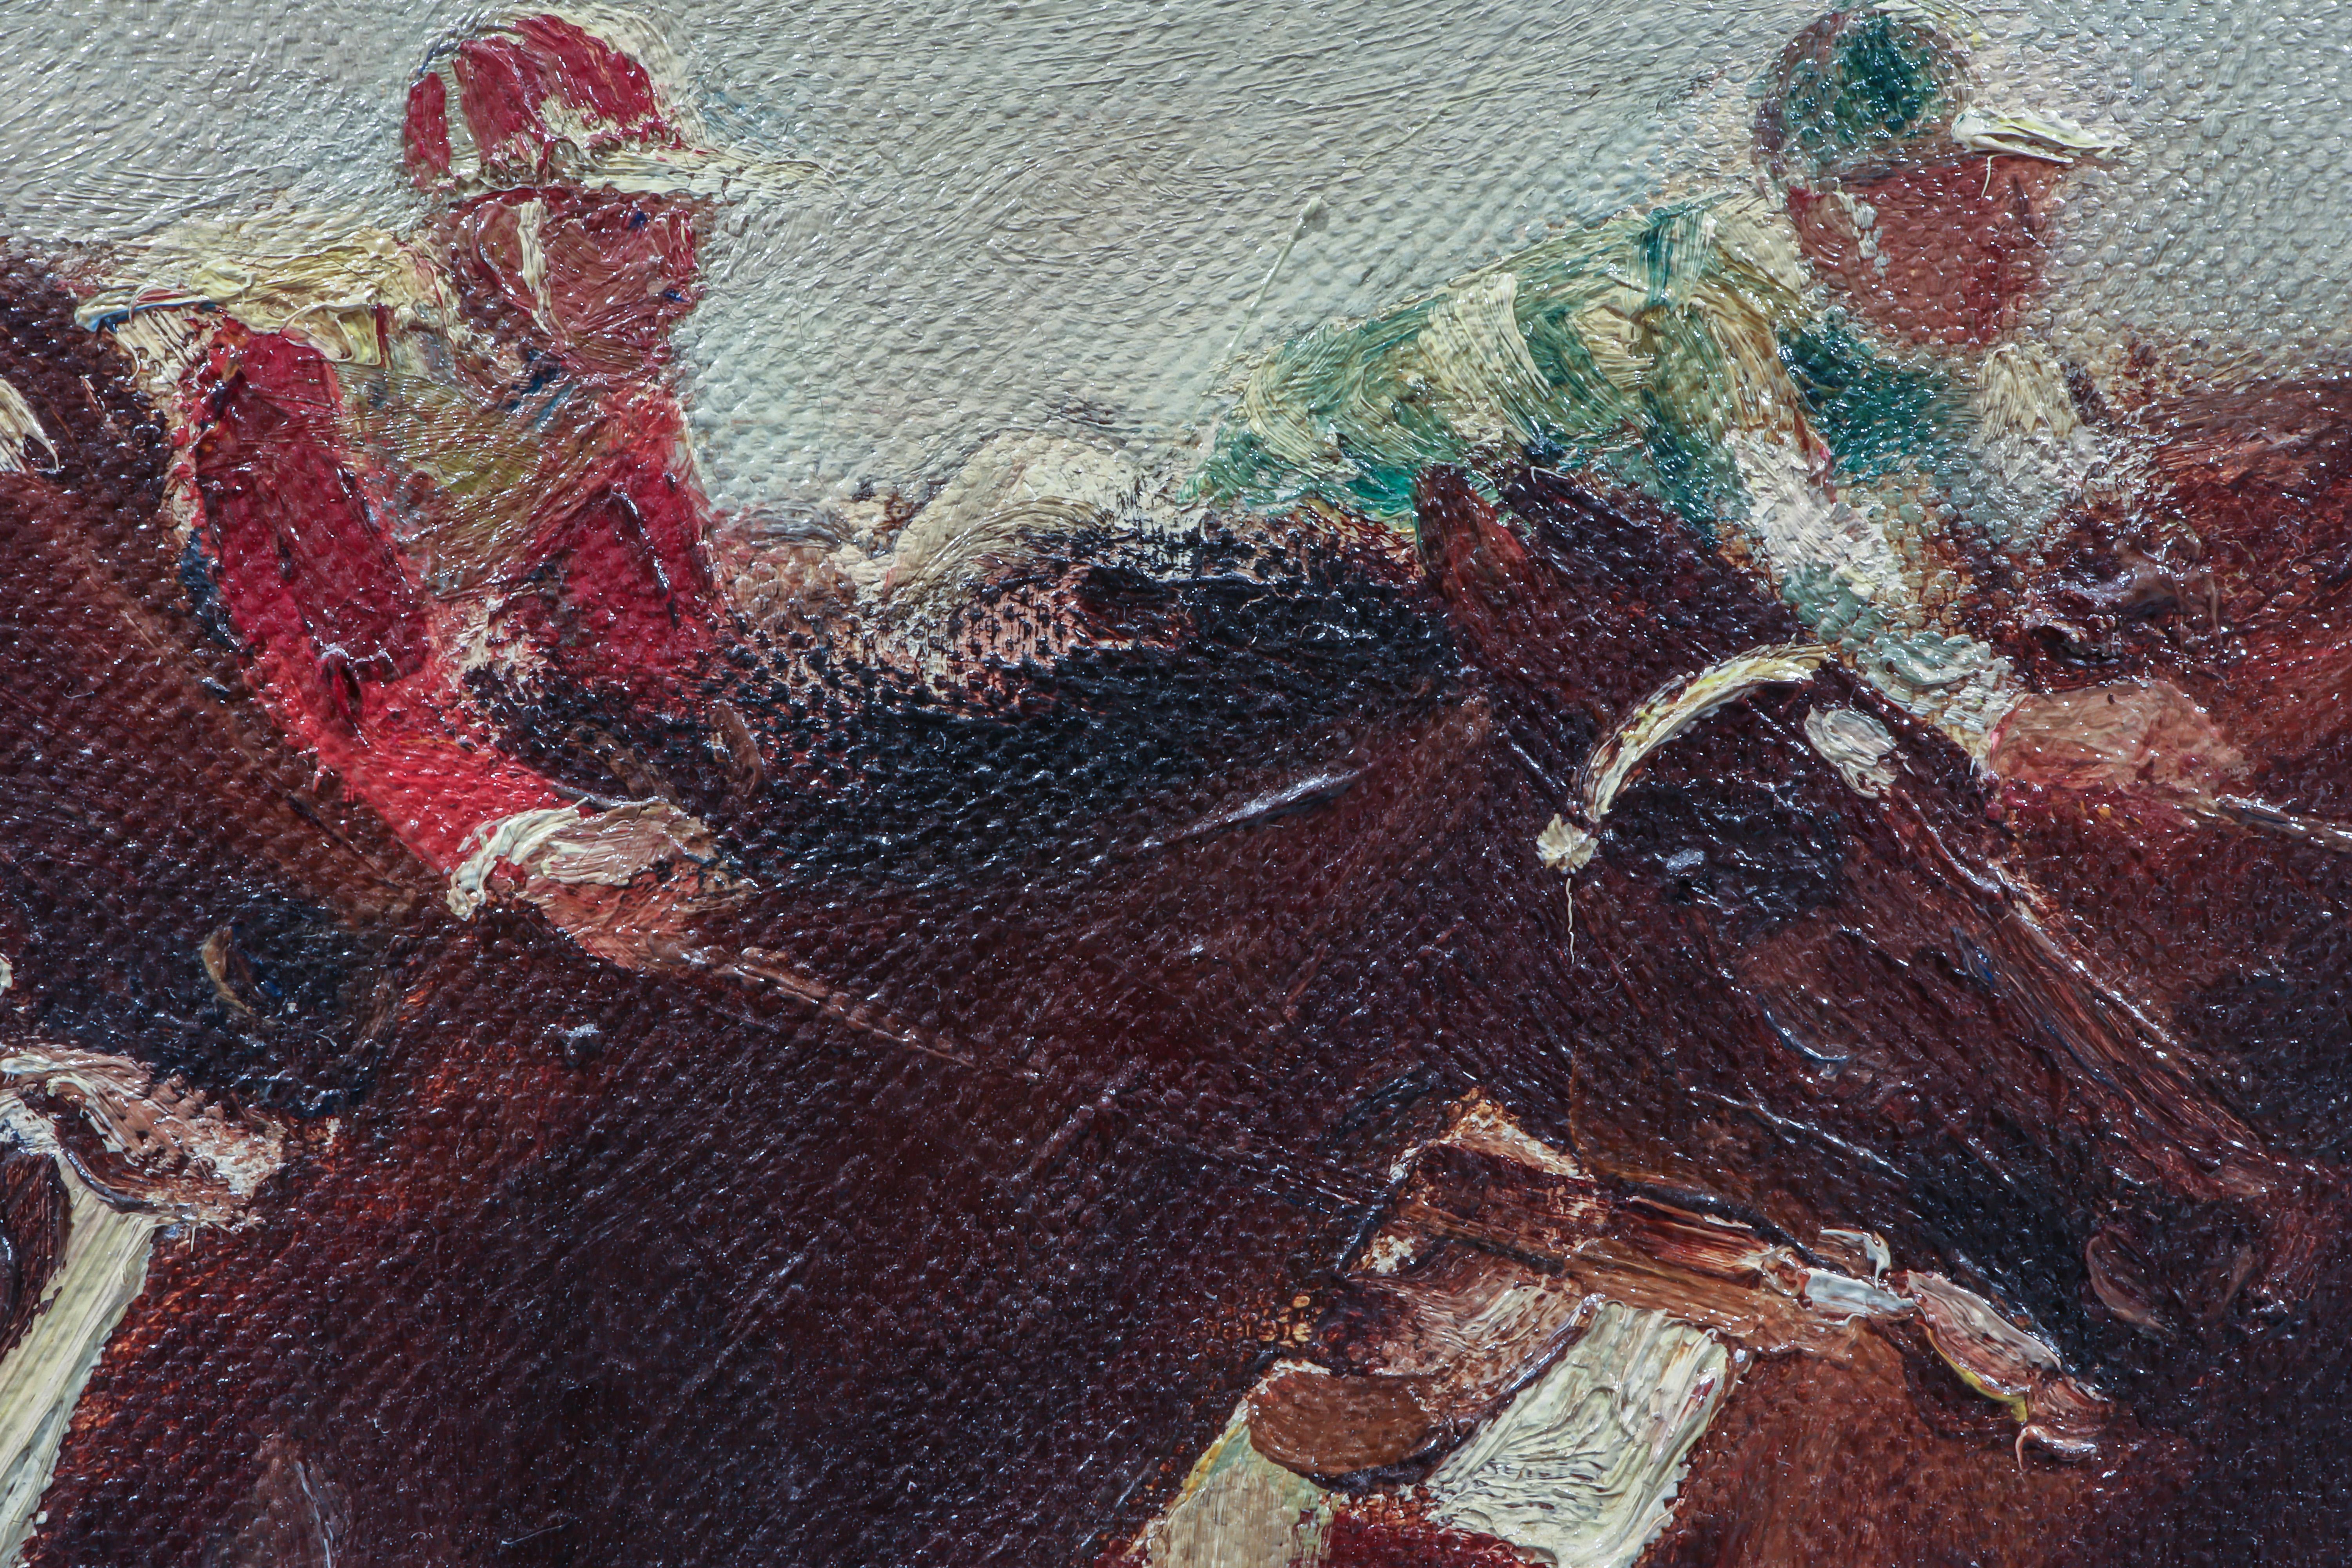 Horse racing Scene in Impressionistic style  For Sale 3